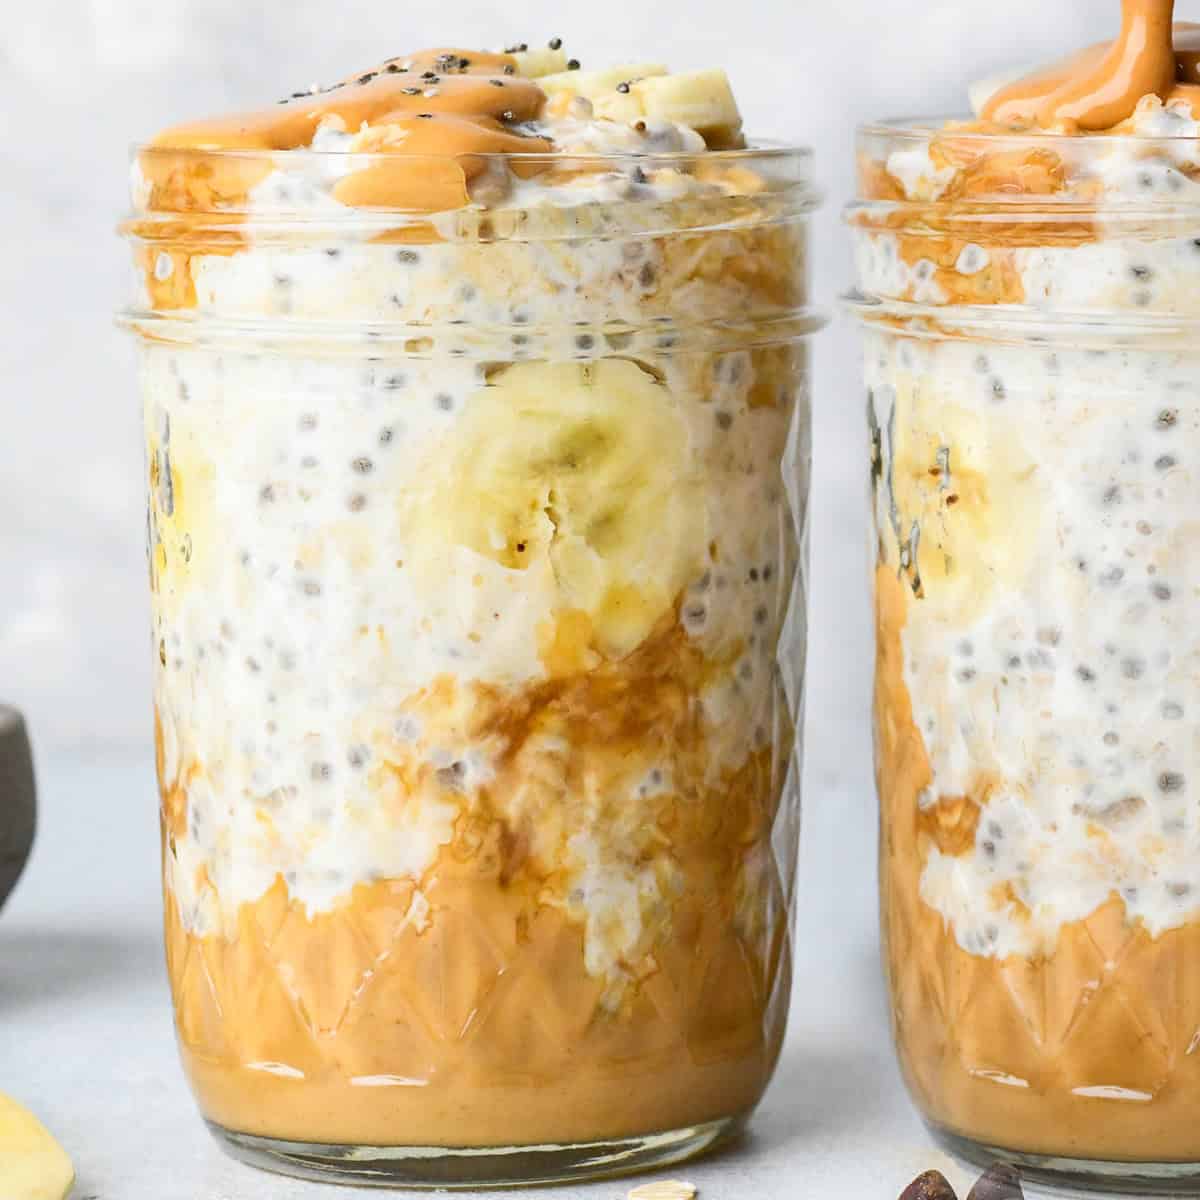 two jars of Peanut Butter Overnight Oats with bananaas